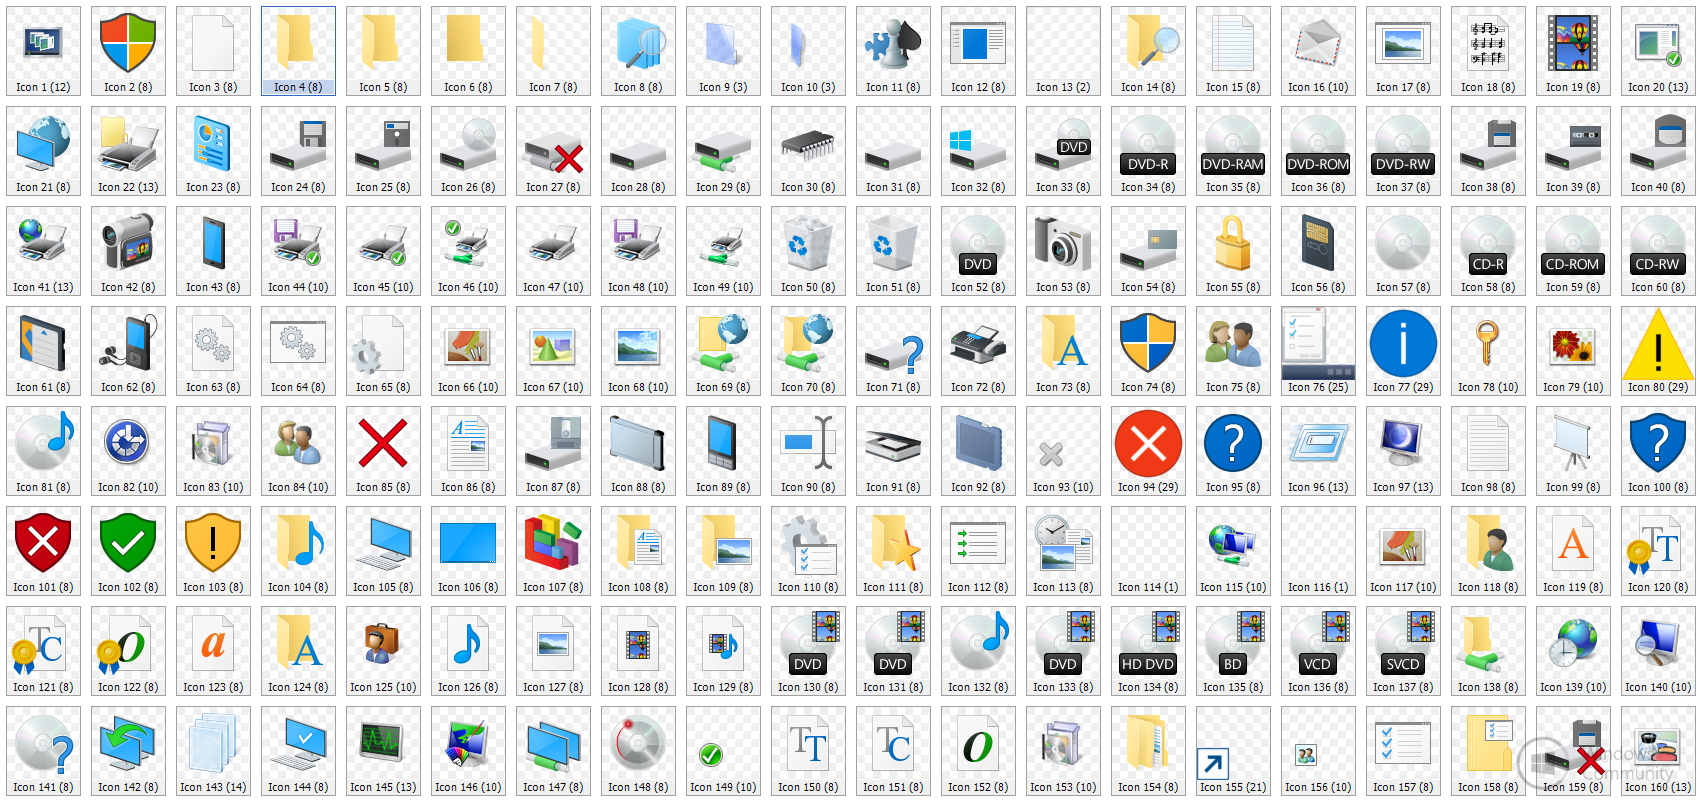 Windows 10 Build 10125 icons for TuneUp by JakeCherryWizardhog on ...